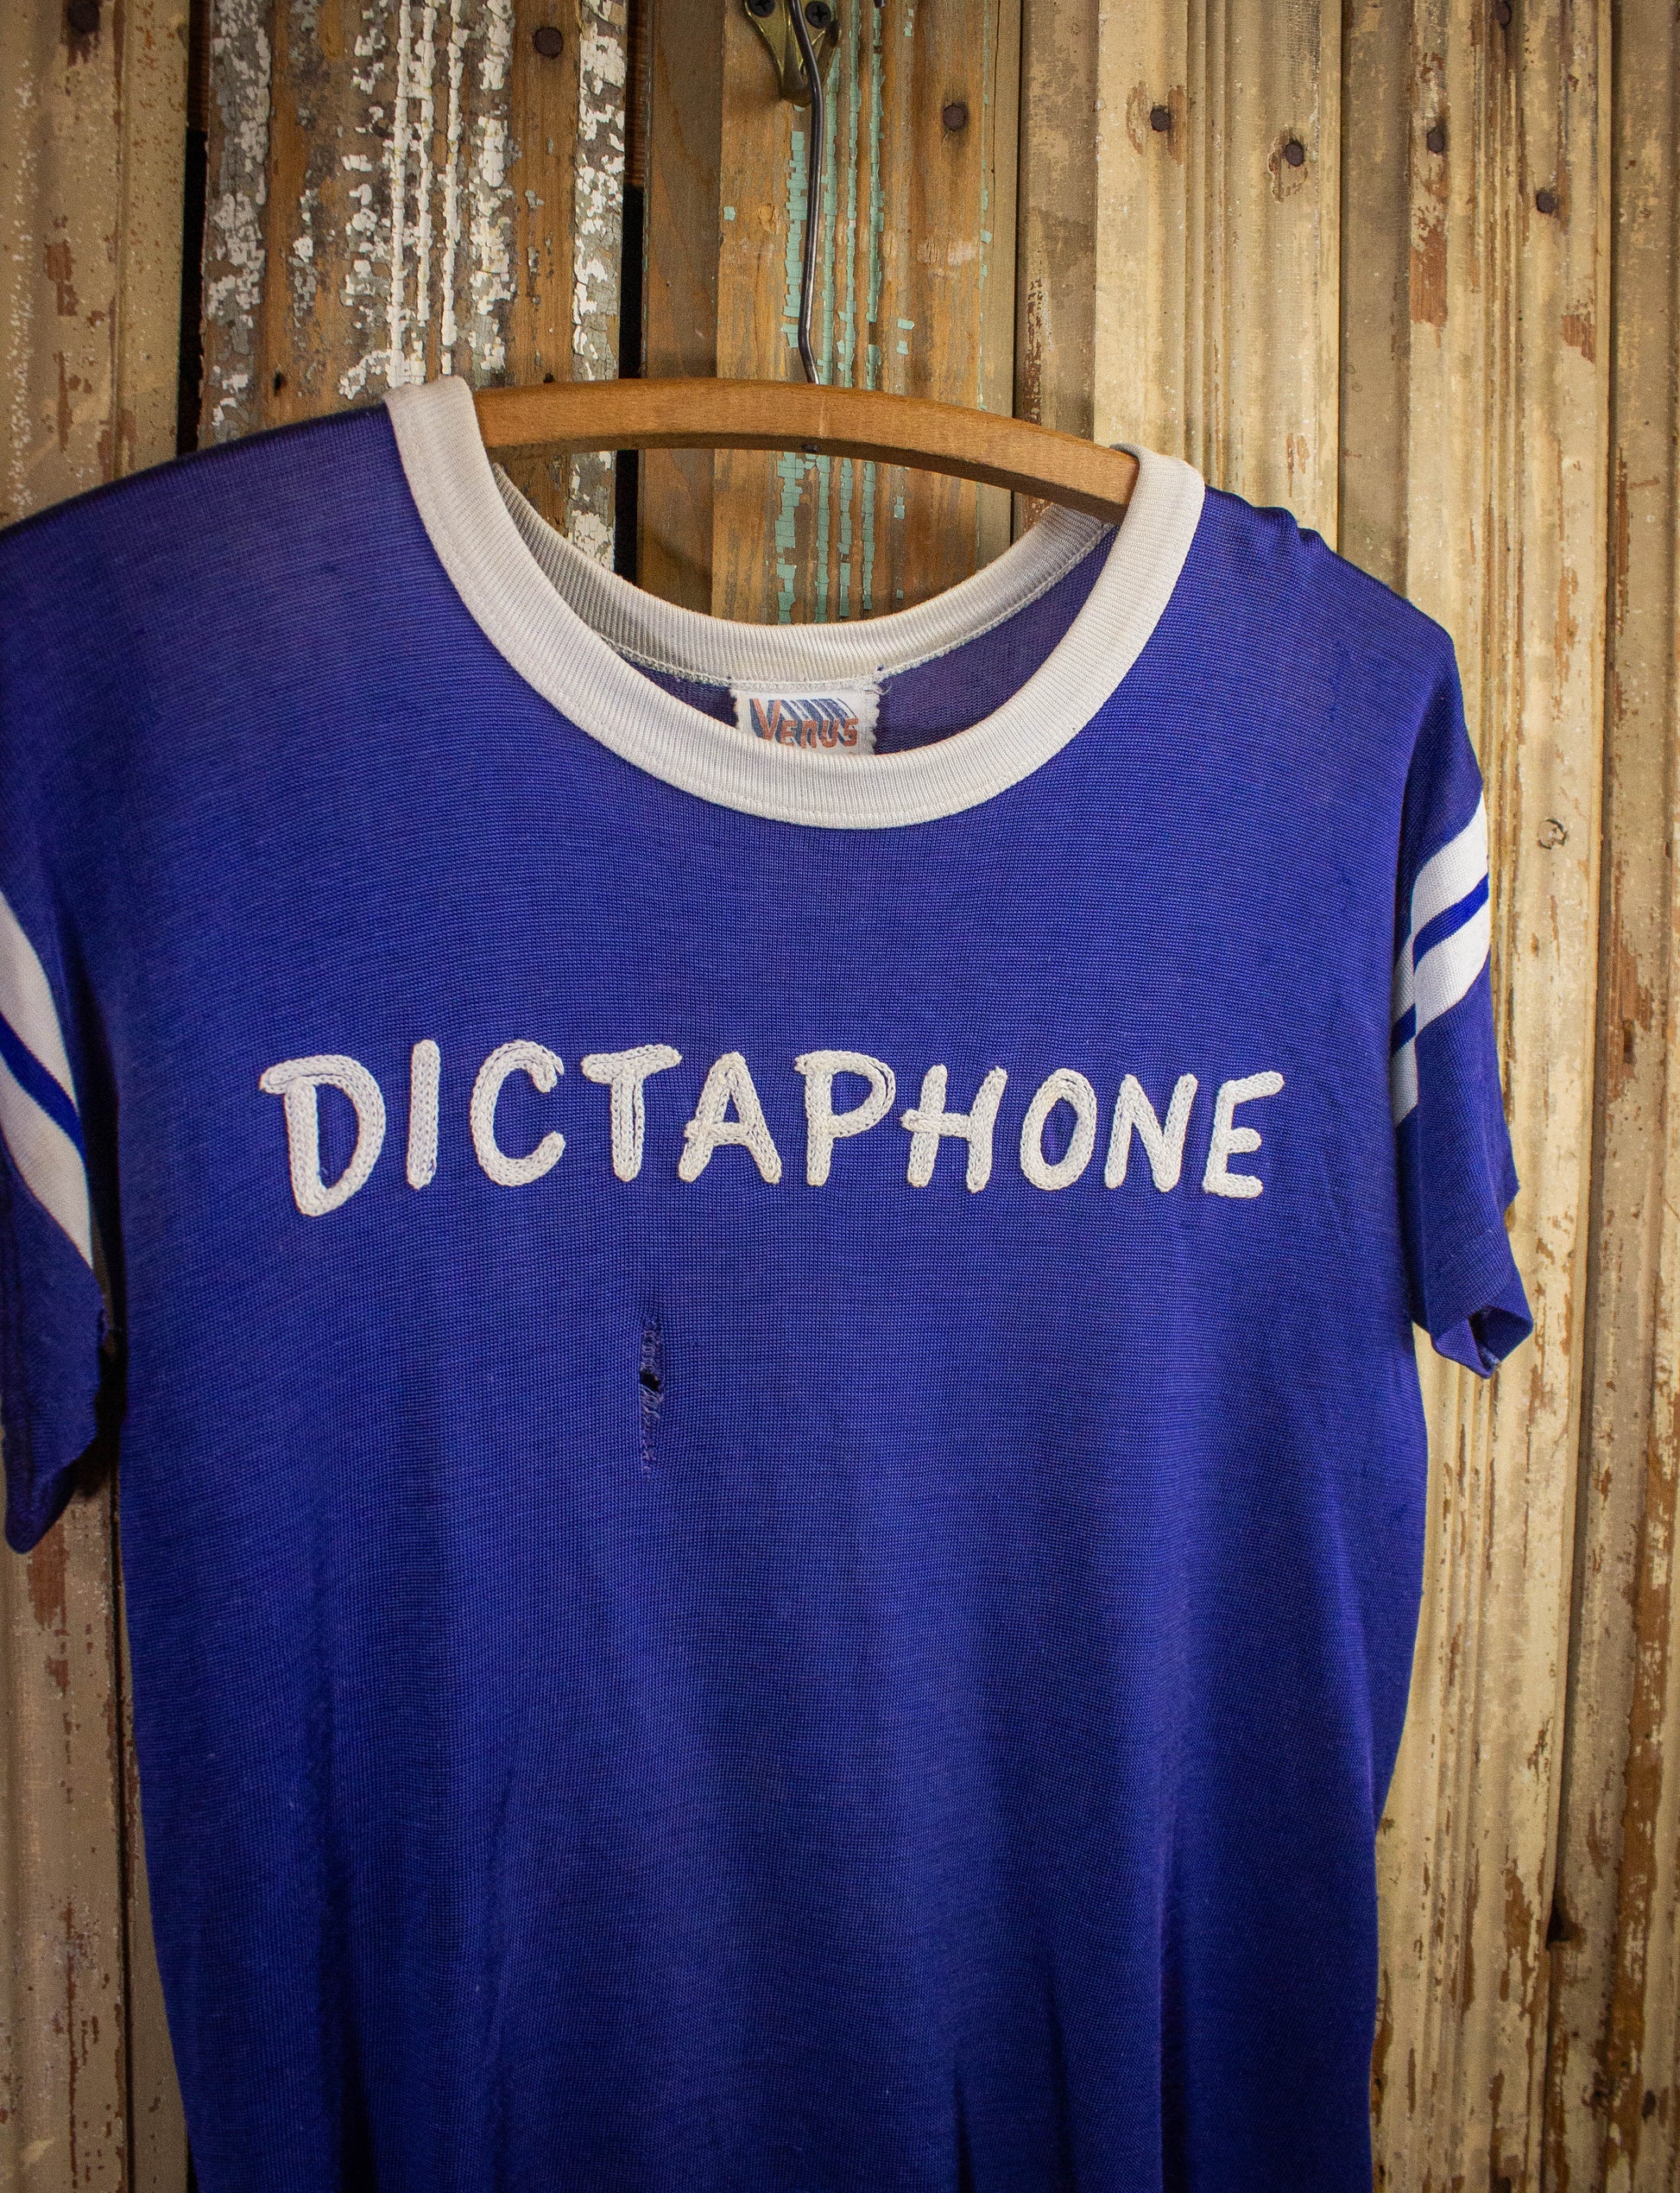 Vintage Dictaphone Chainstitched Graphic T Shirt 80s Blue Small